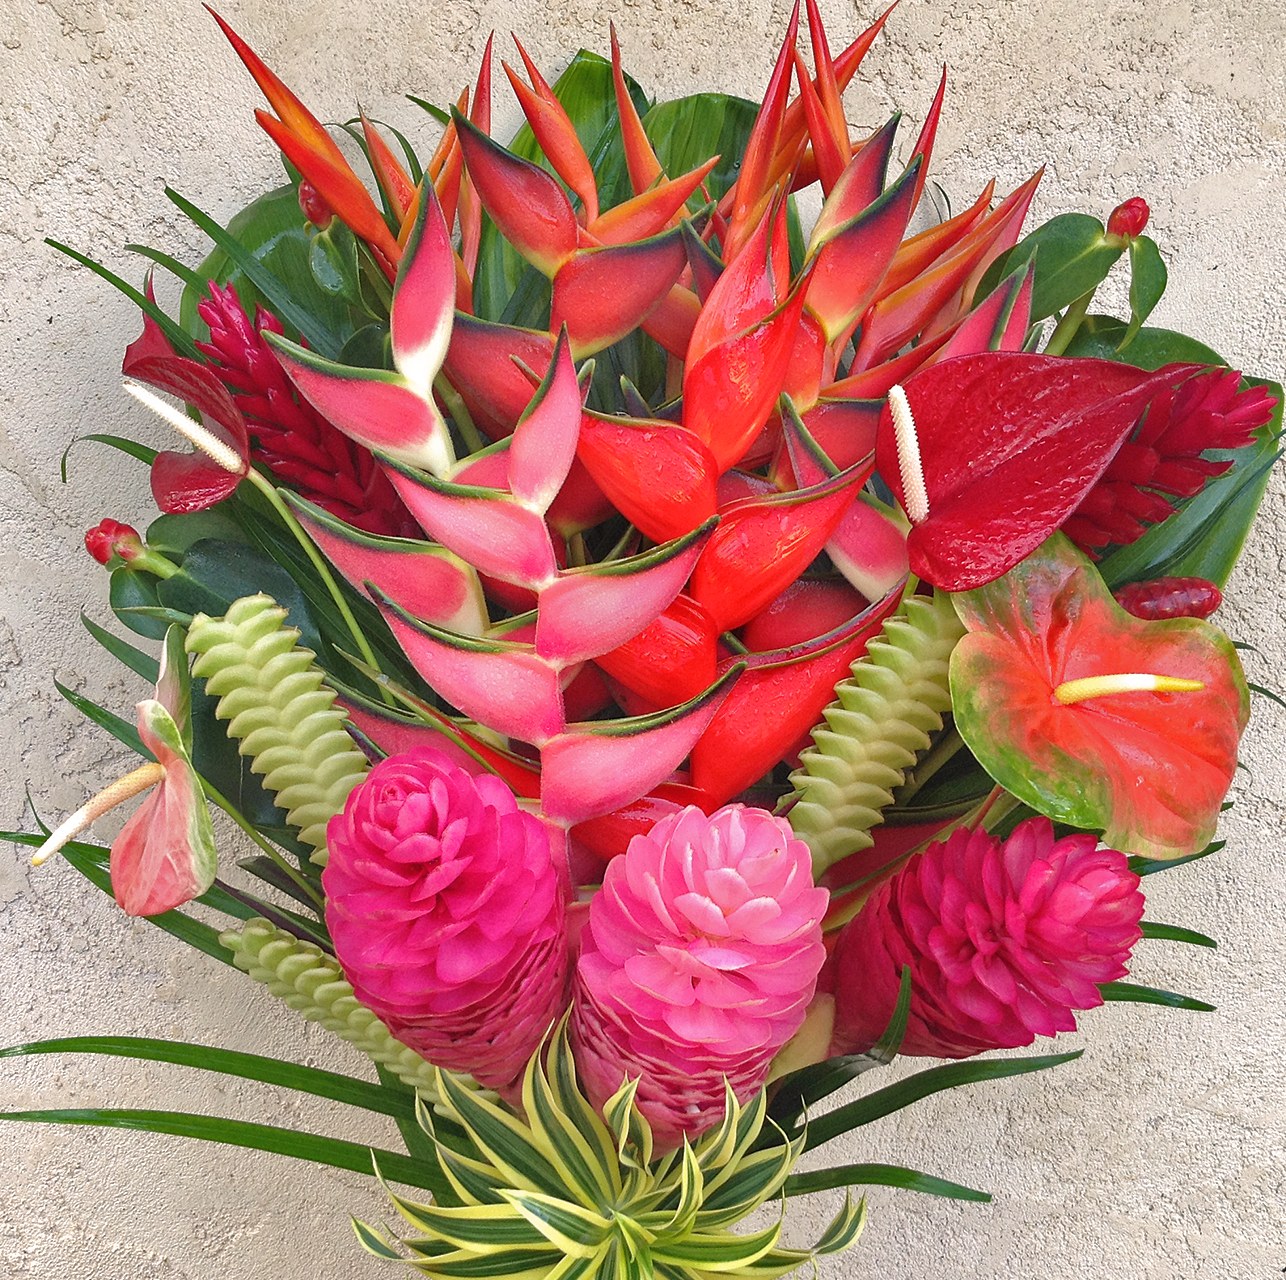 A 45 piece arrangement with 30 flowers and 15 foliage.